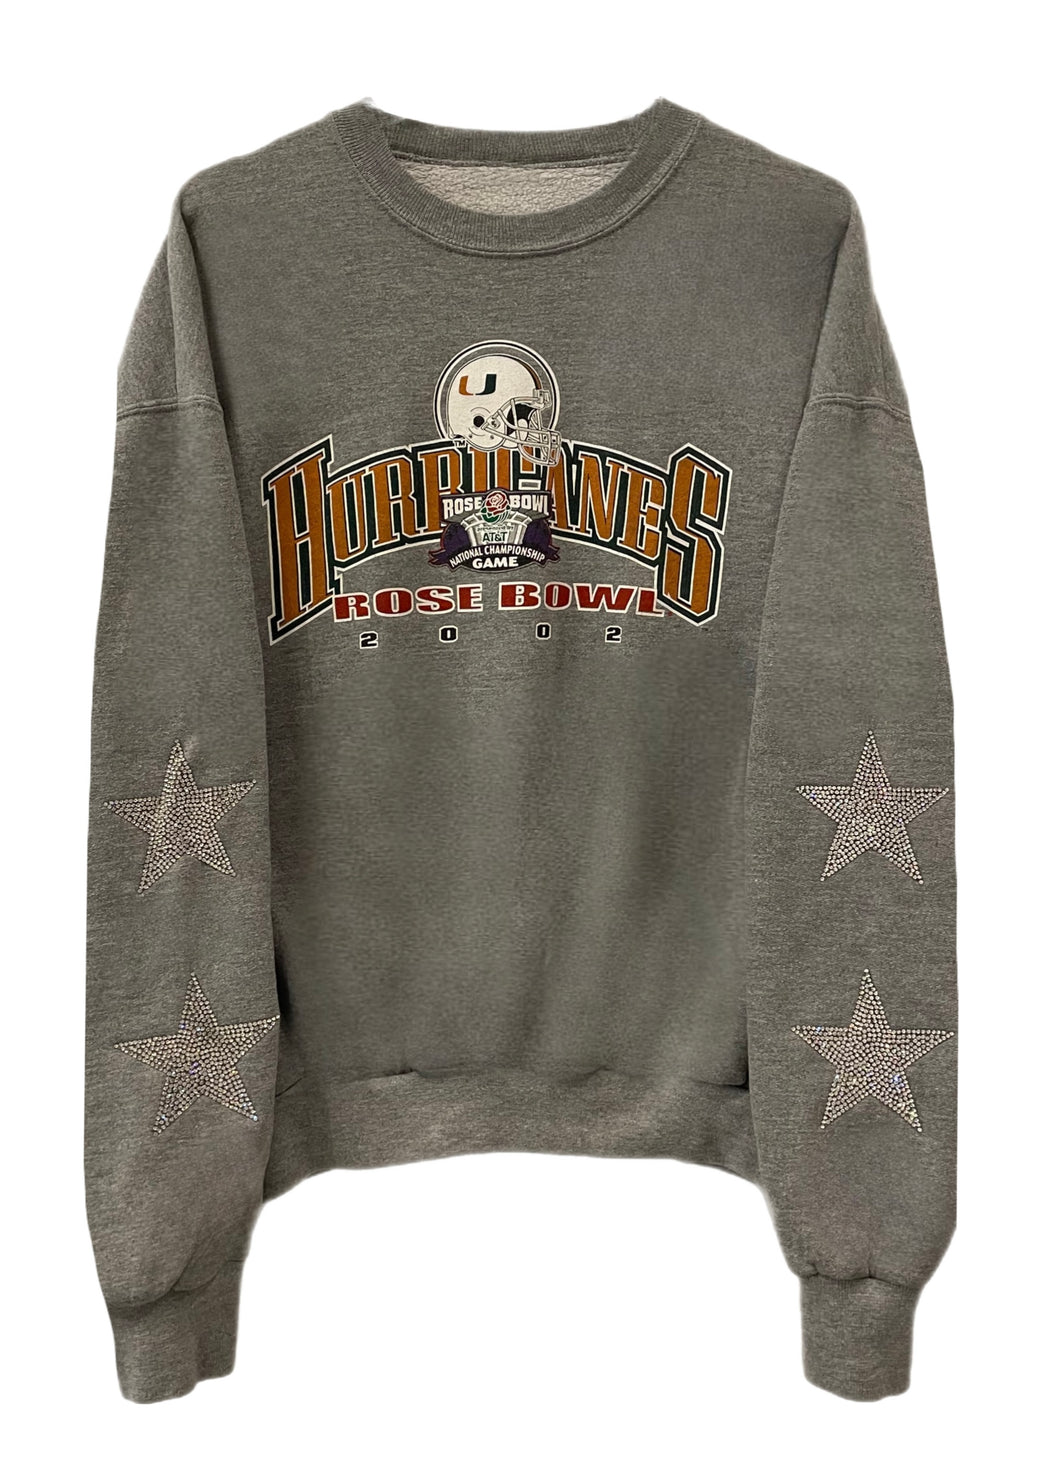 University of Miami, One of a KIND “Rare Find” Vintage Miami Hurricanes Sweatshirt with Crystal Star Design